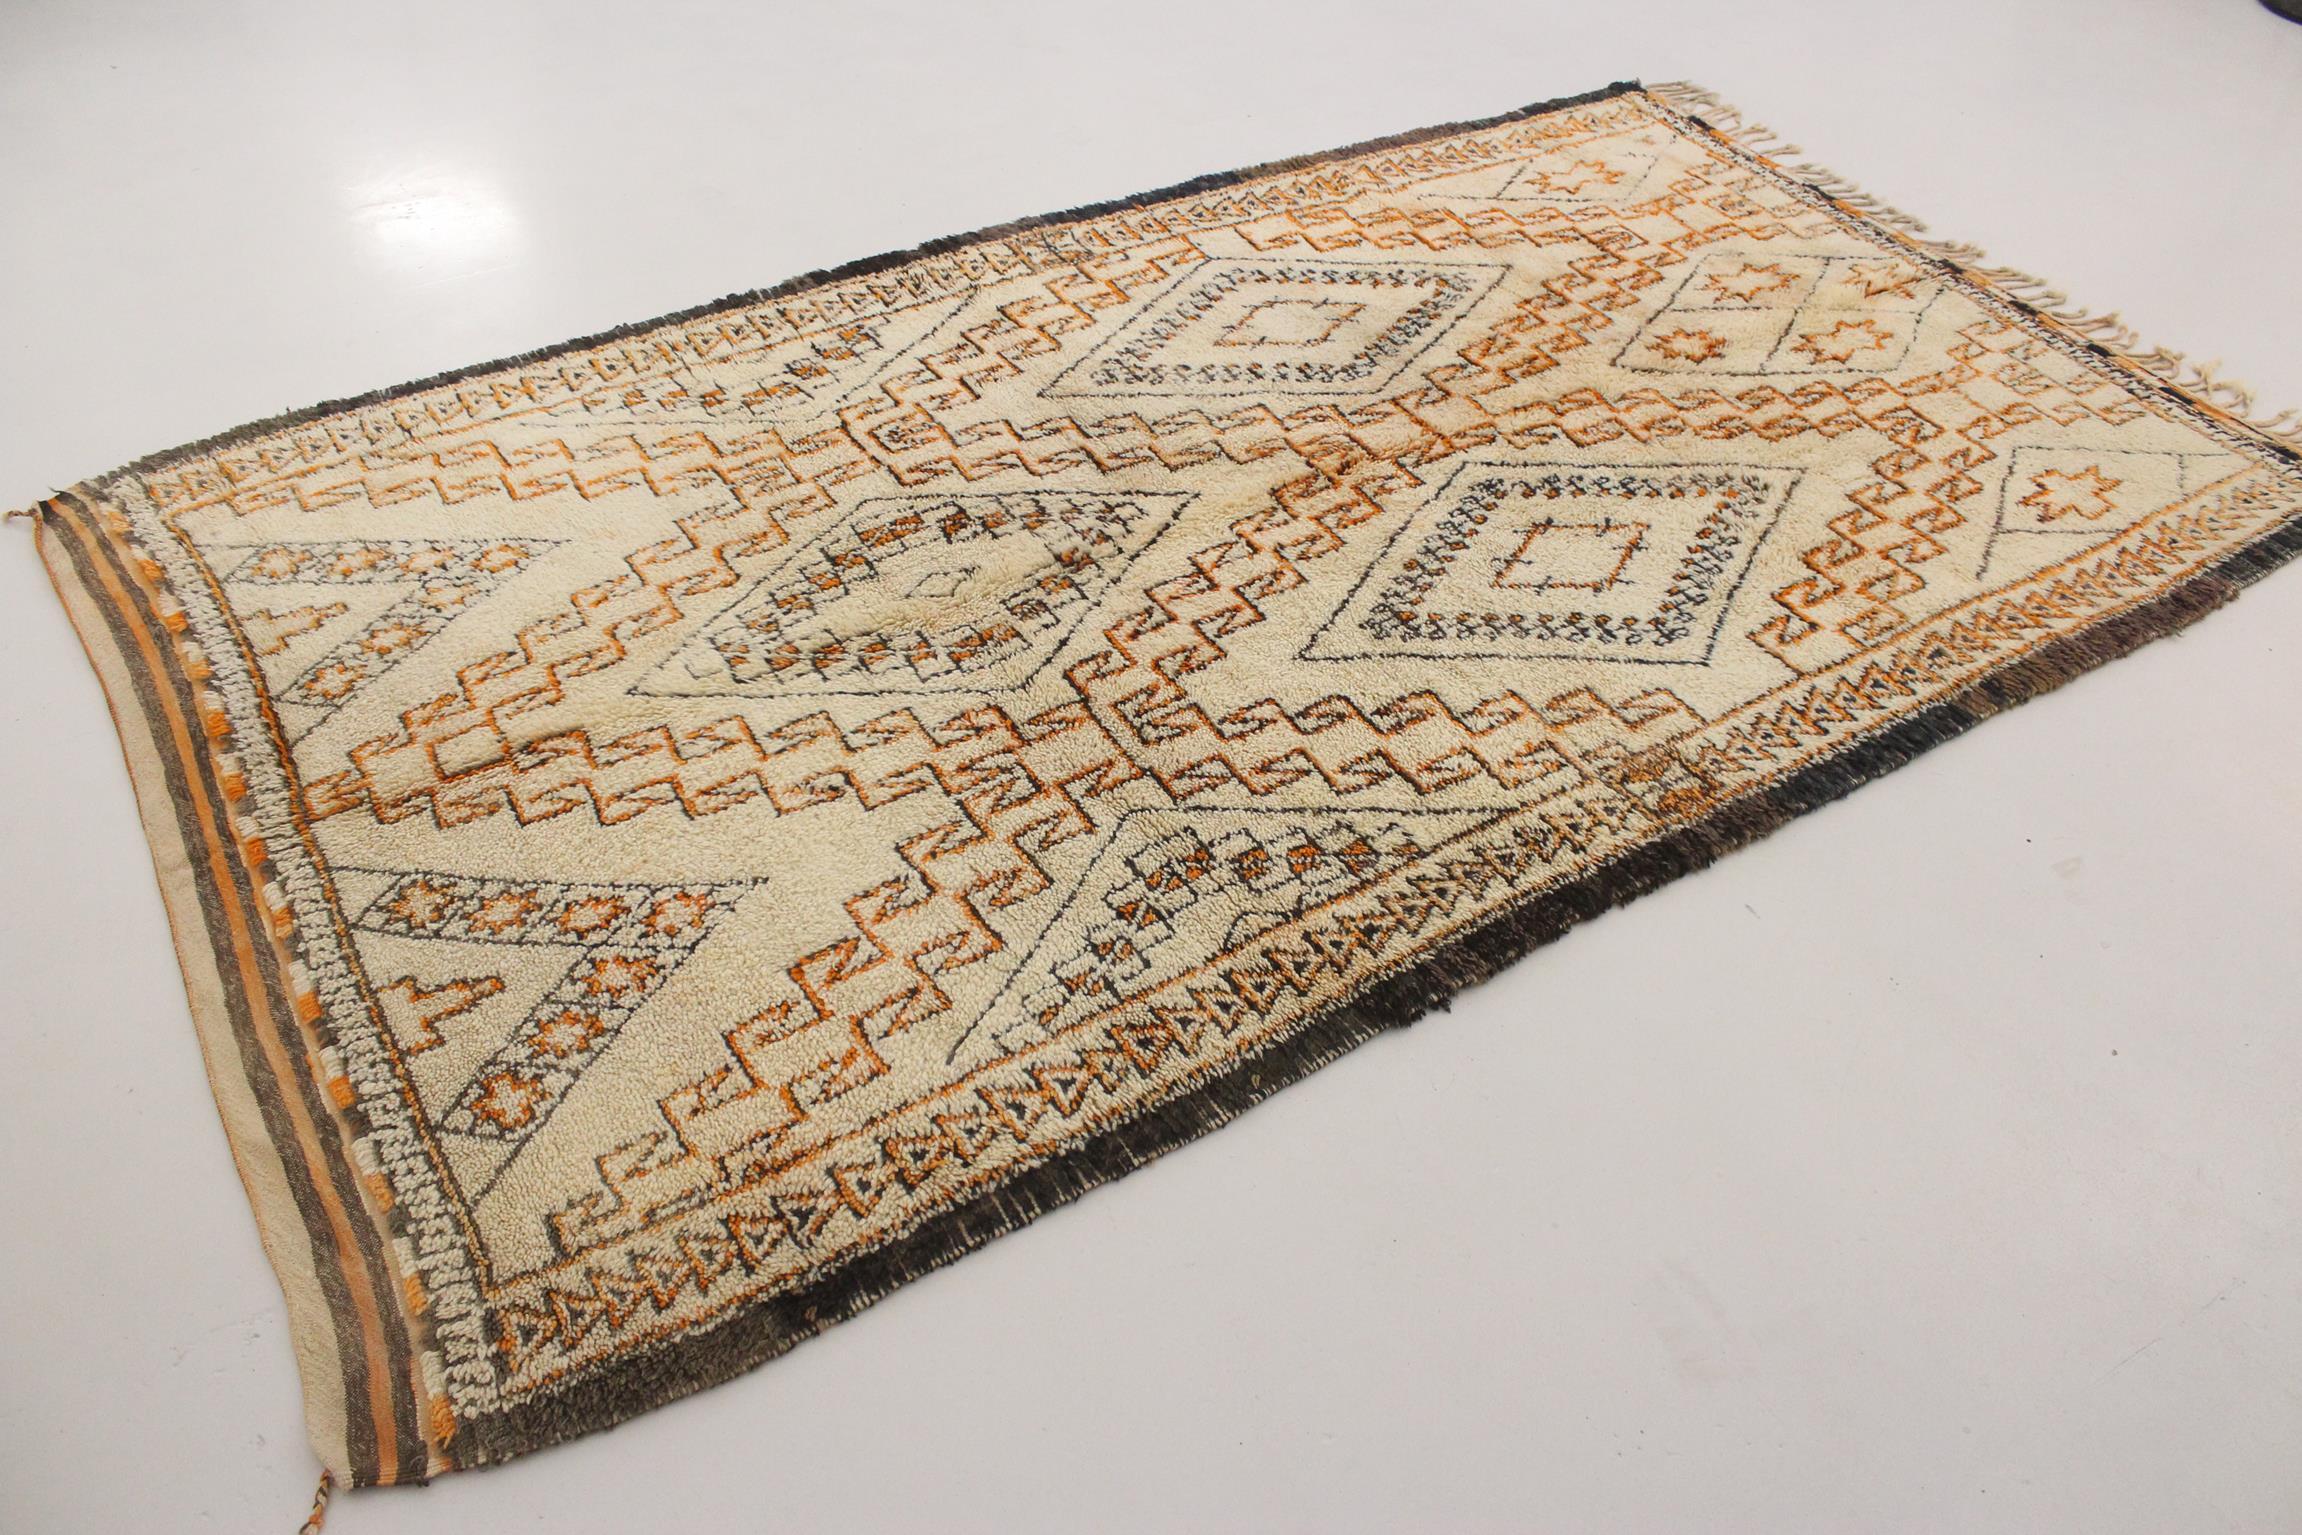 Vintage Moroccan Beni Ourain rug - Beige/orange - 6.2x11.1feet / 190x340cm In Good Condition For Sale In Marrakech, MA